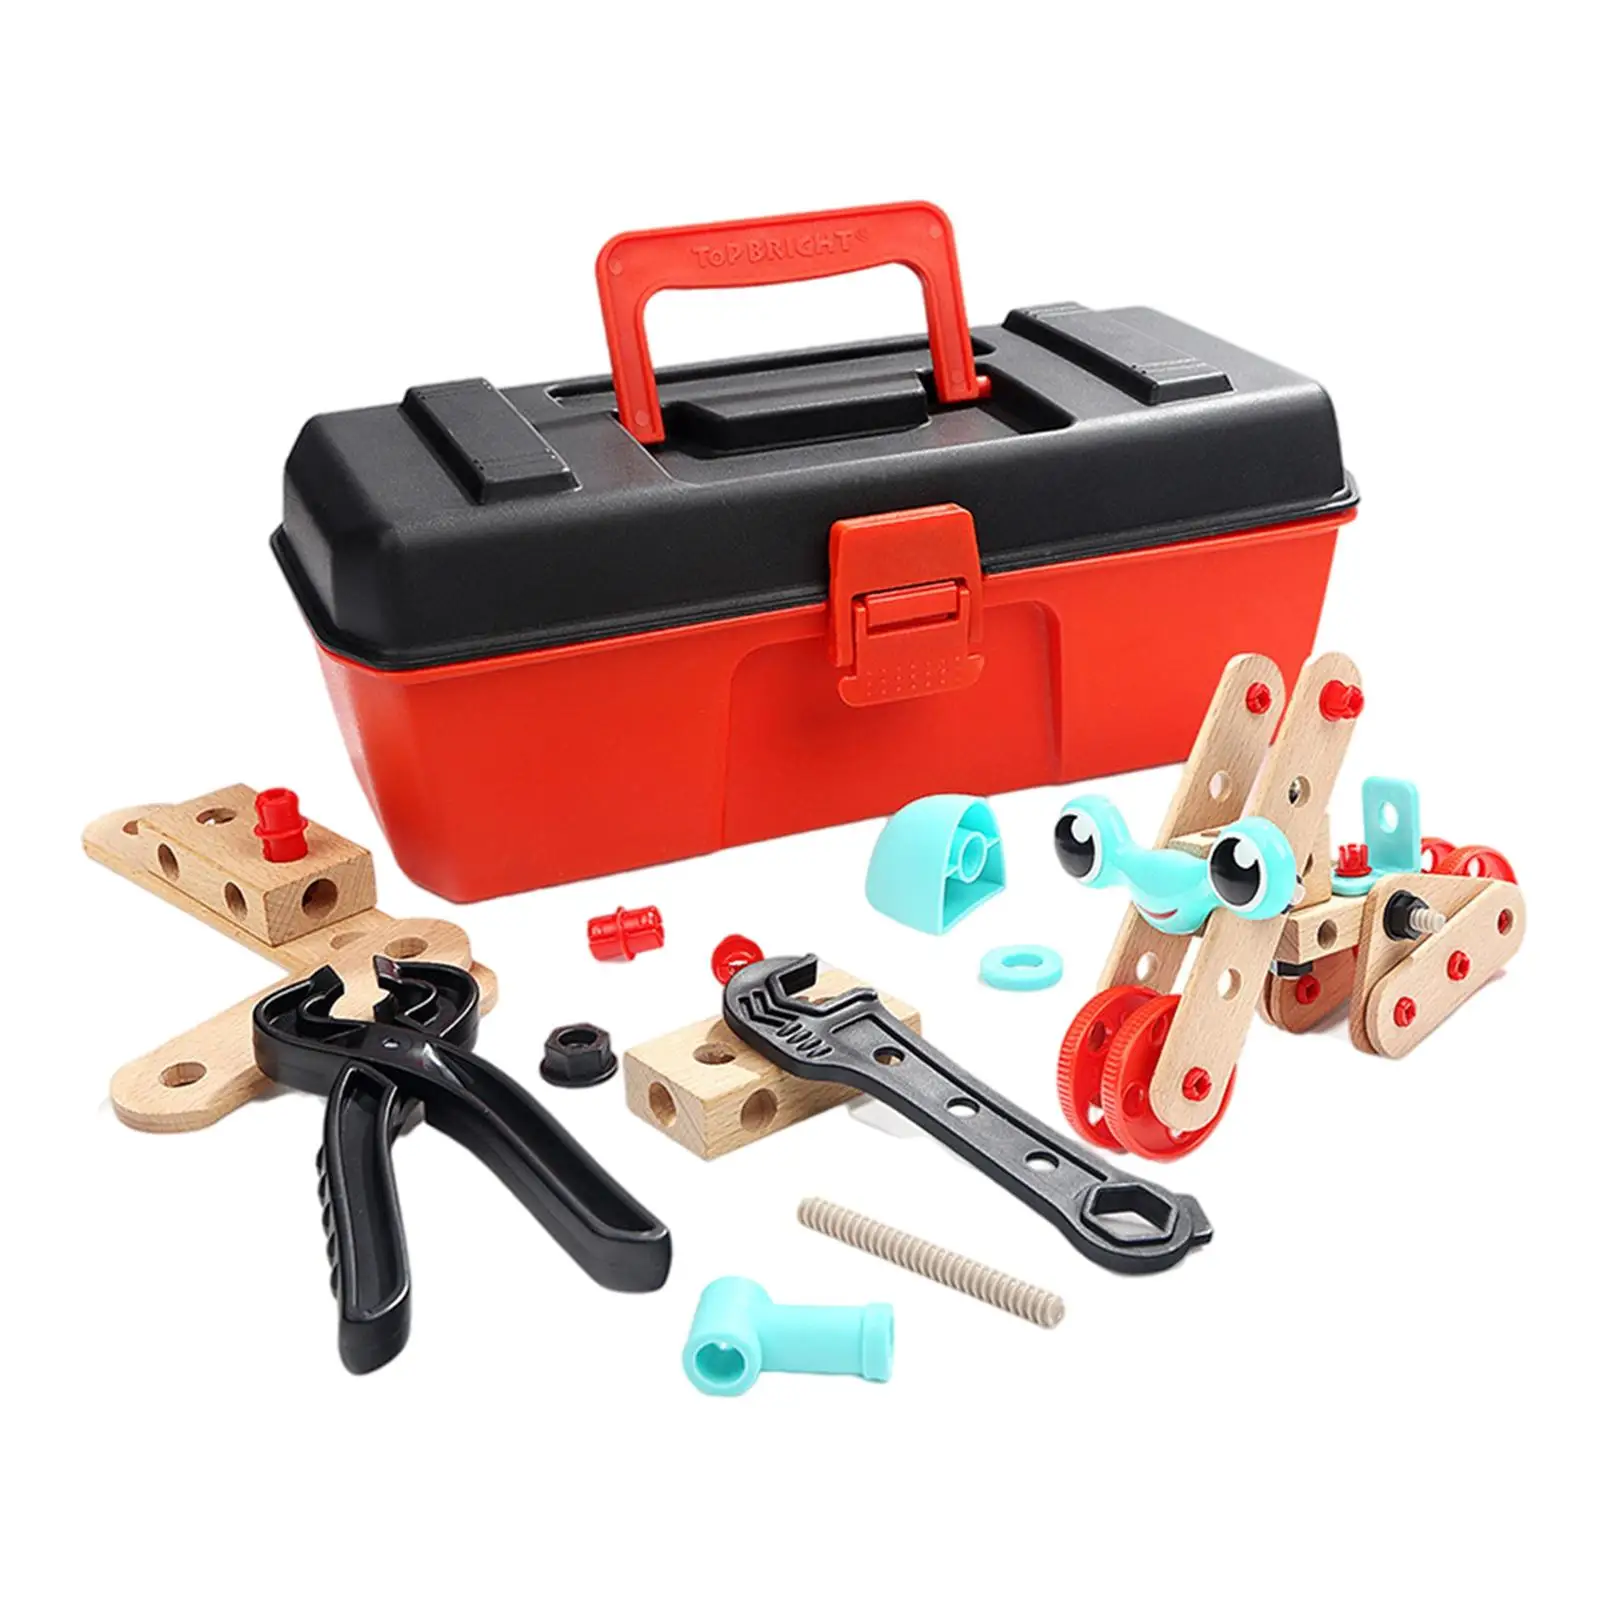 Kids Wooden Toolbox Toys Educational Toys Disassembly Screw Assembly